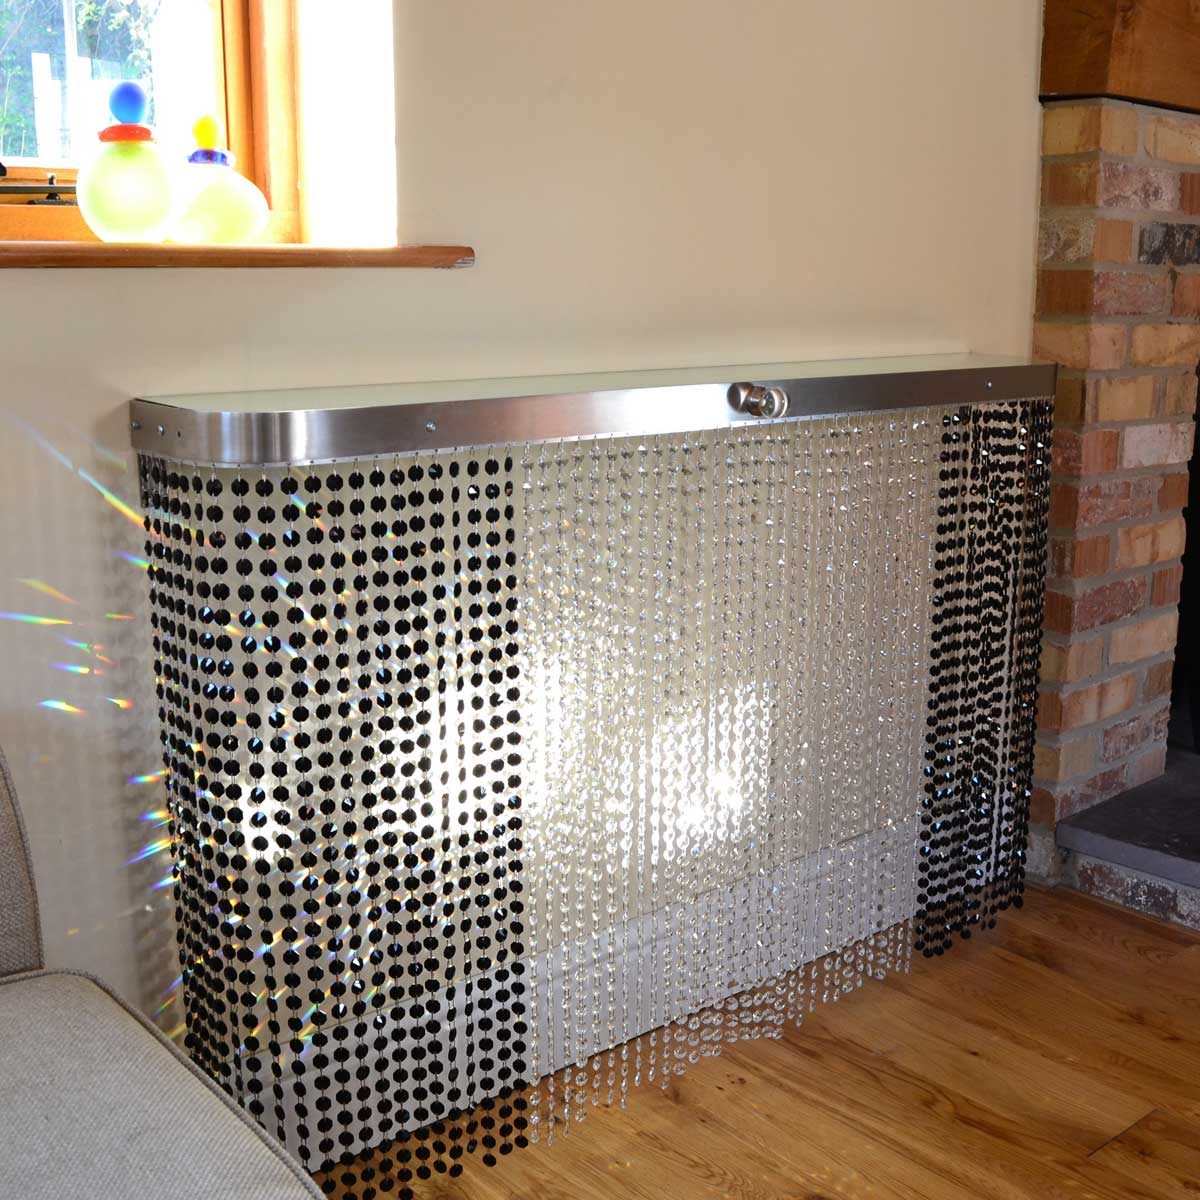 Hand Crafted Radiator Cover, Heater Cover by JKB Design